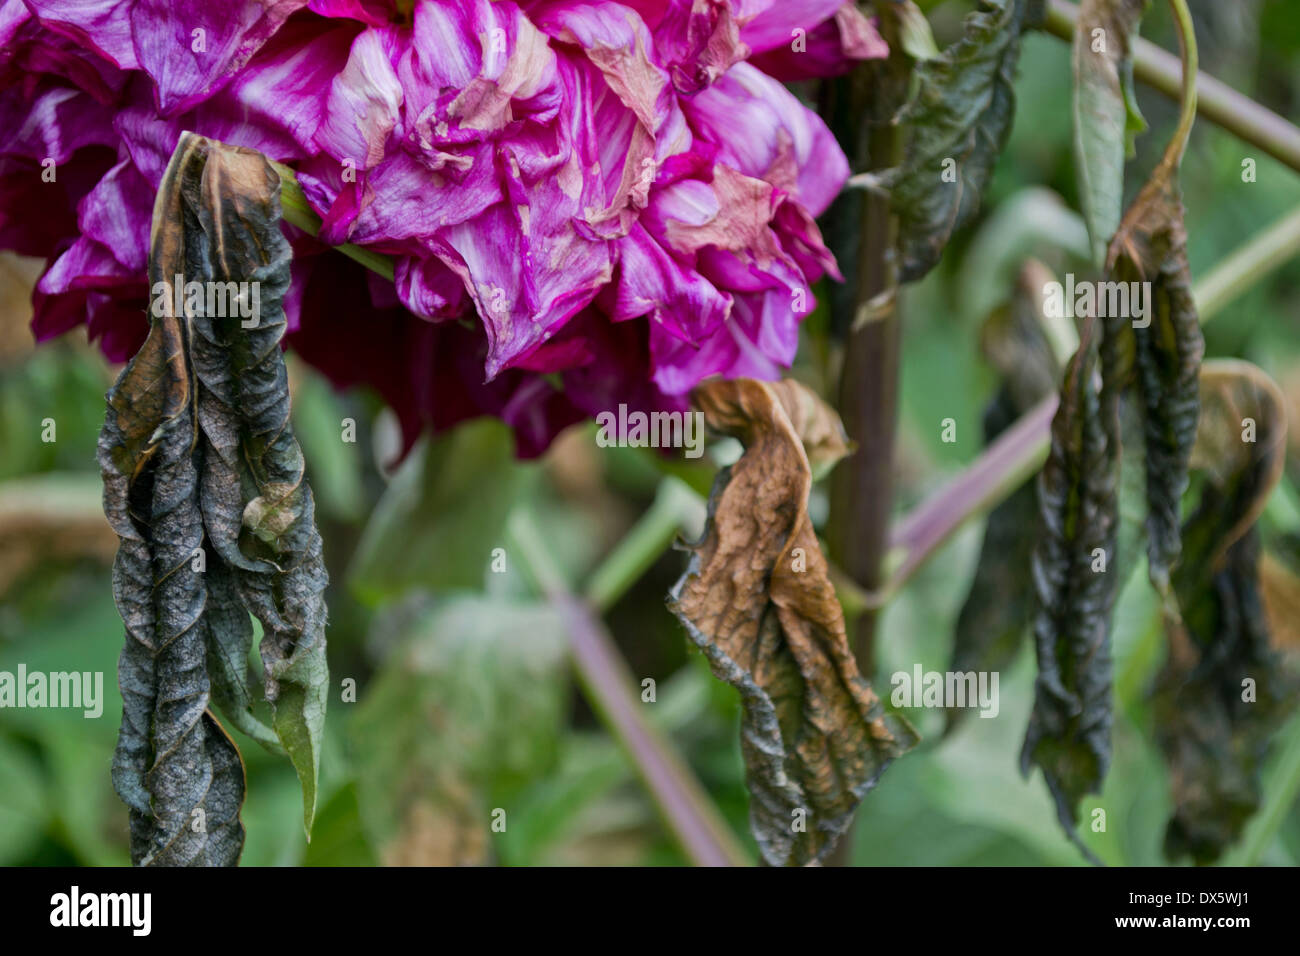 This is a photo of a purple Dahlia flower. Stock Photo